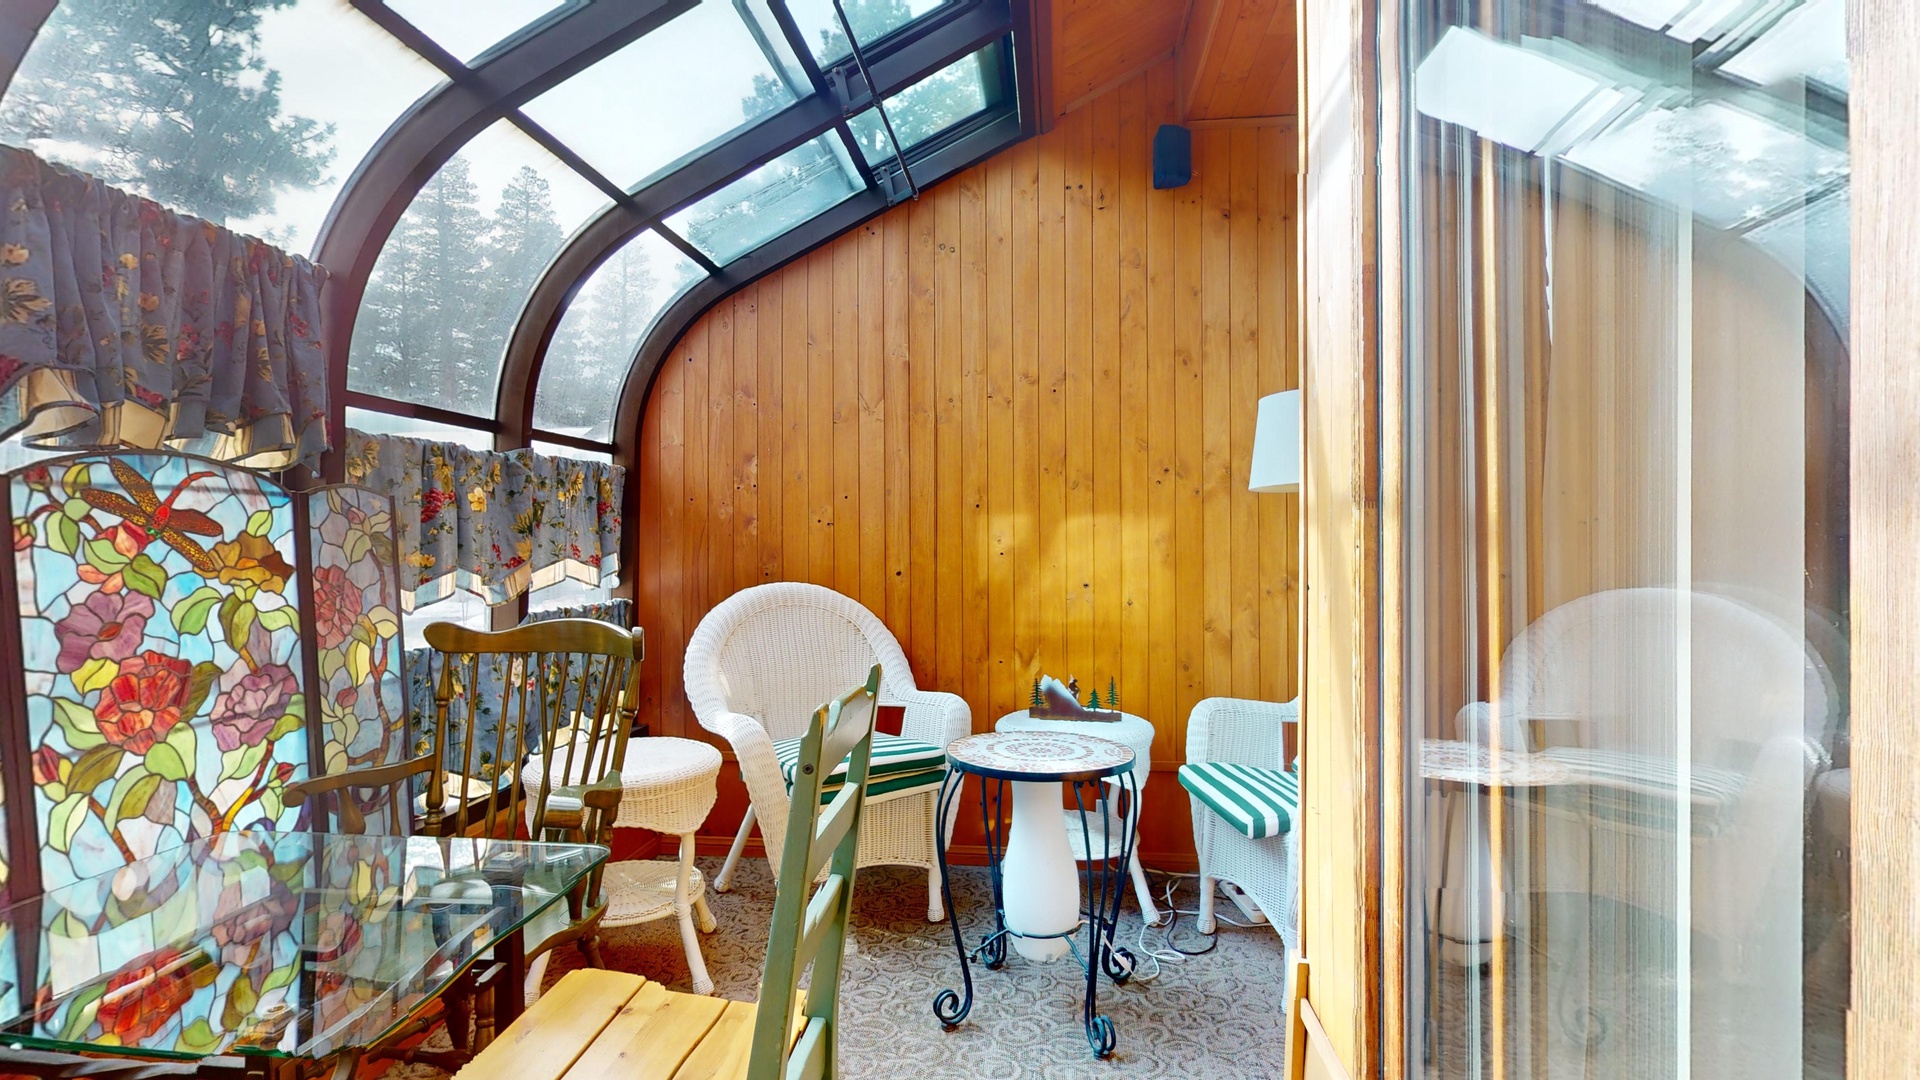 Embrace the sun or snow in the breakfast room